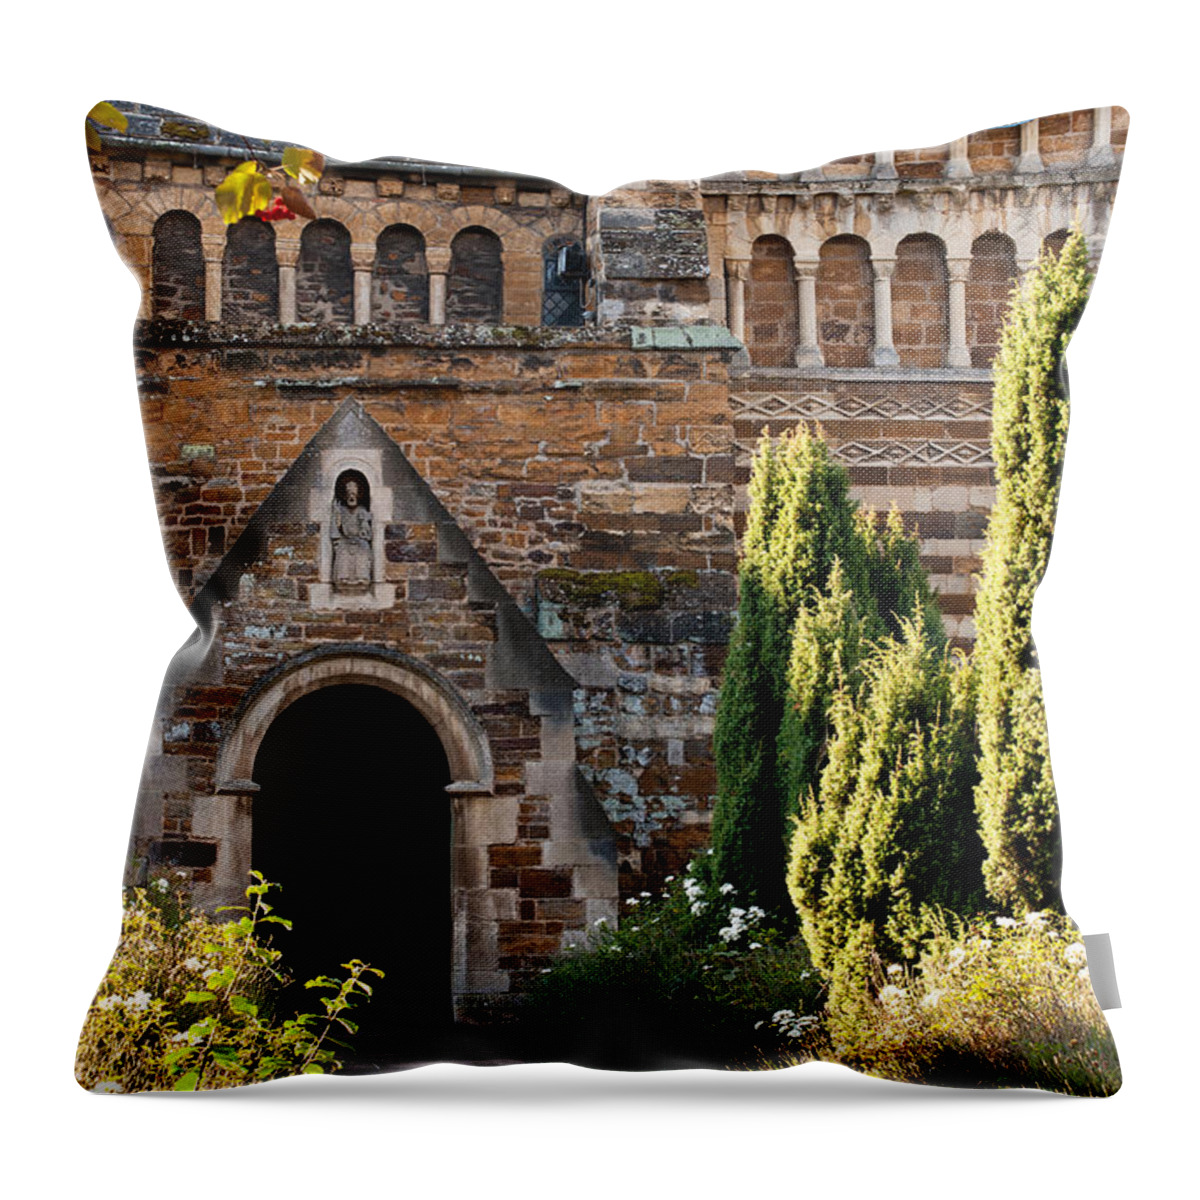 Old Throw Pillow featuring the photograph St Peter's Church Entry 01 by Rick Piper Photography